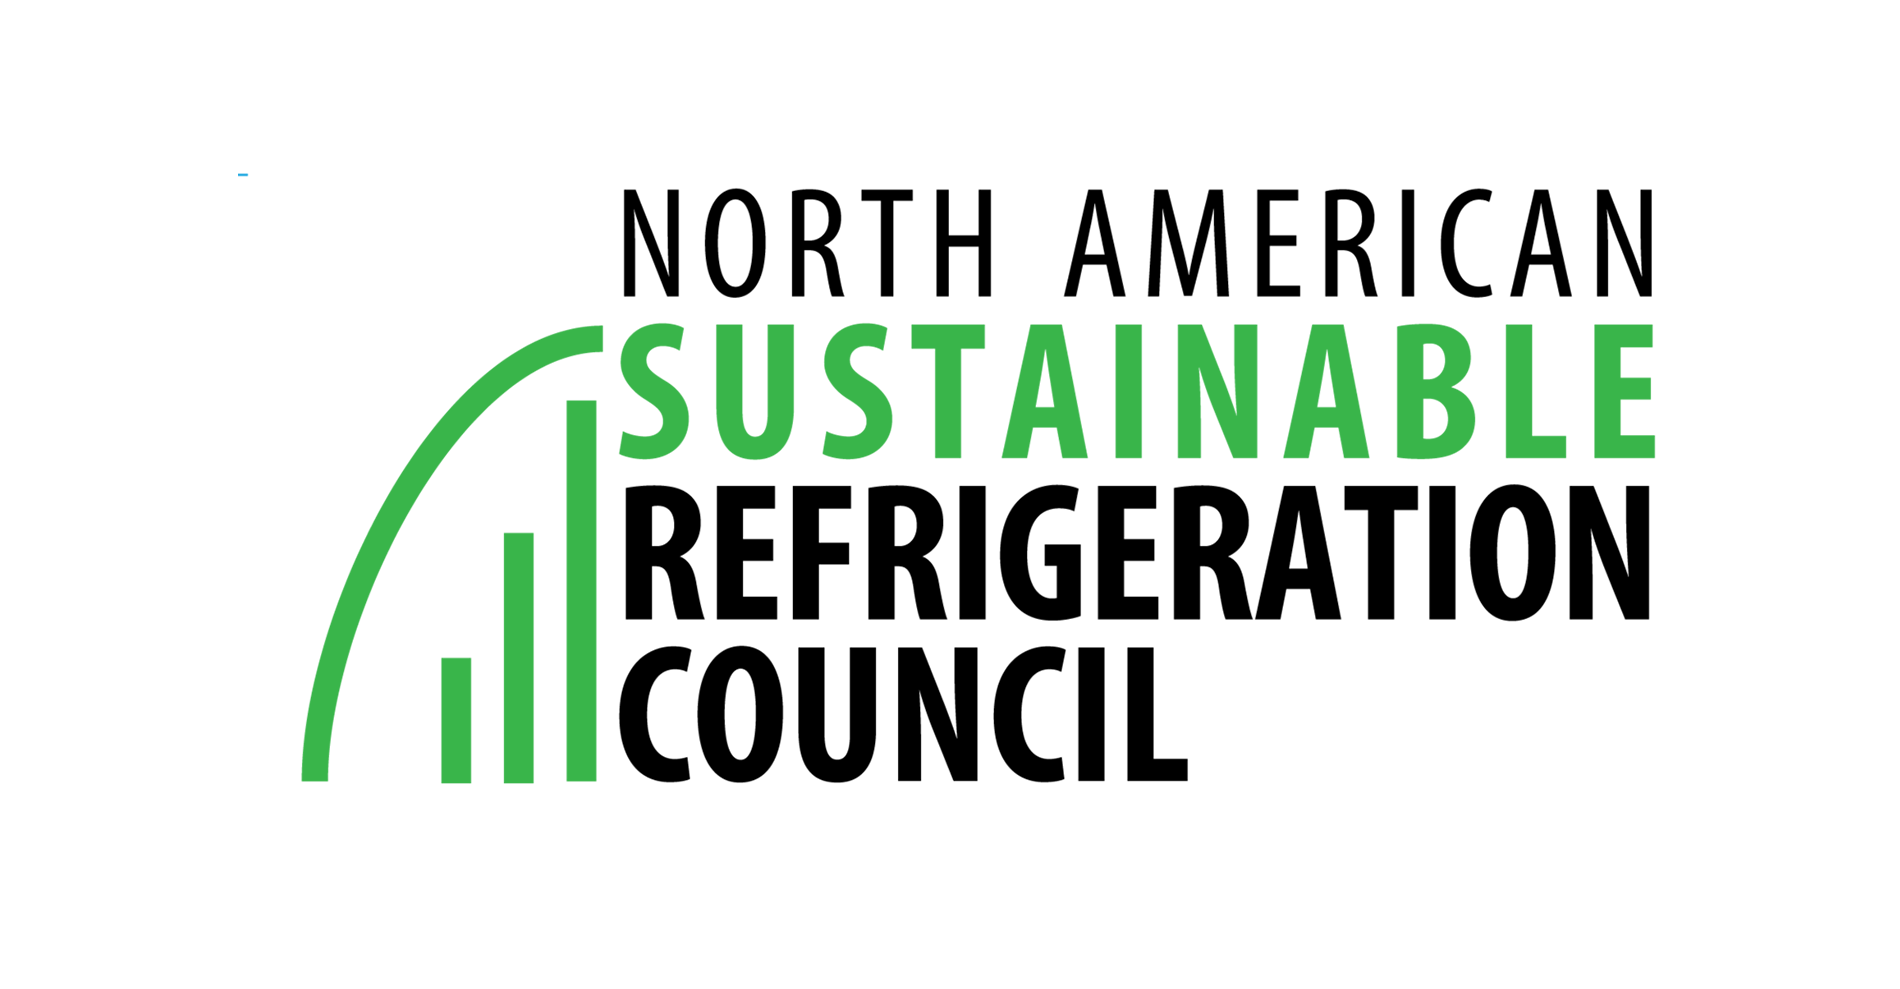 North American Sustainable Refrigeration Council